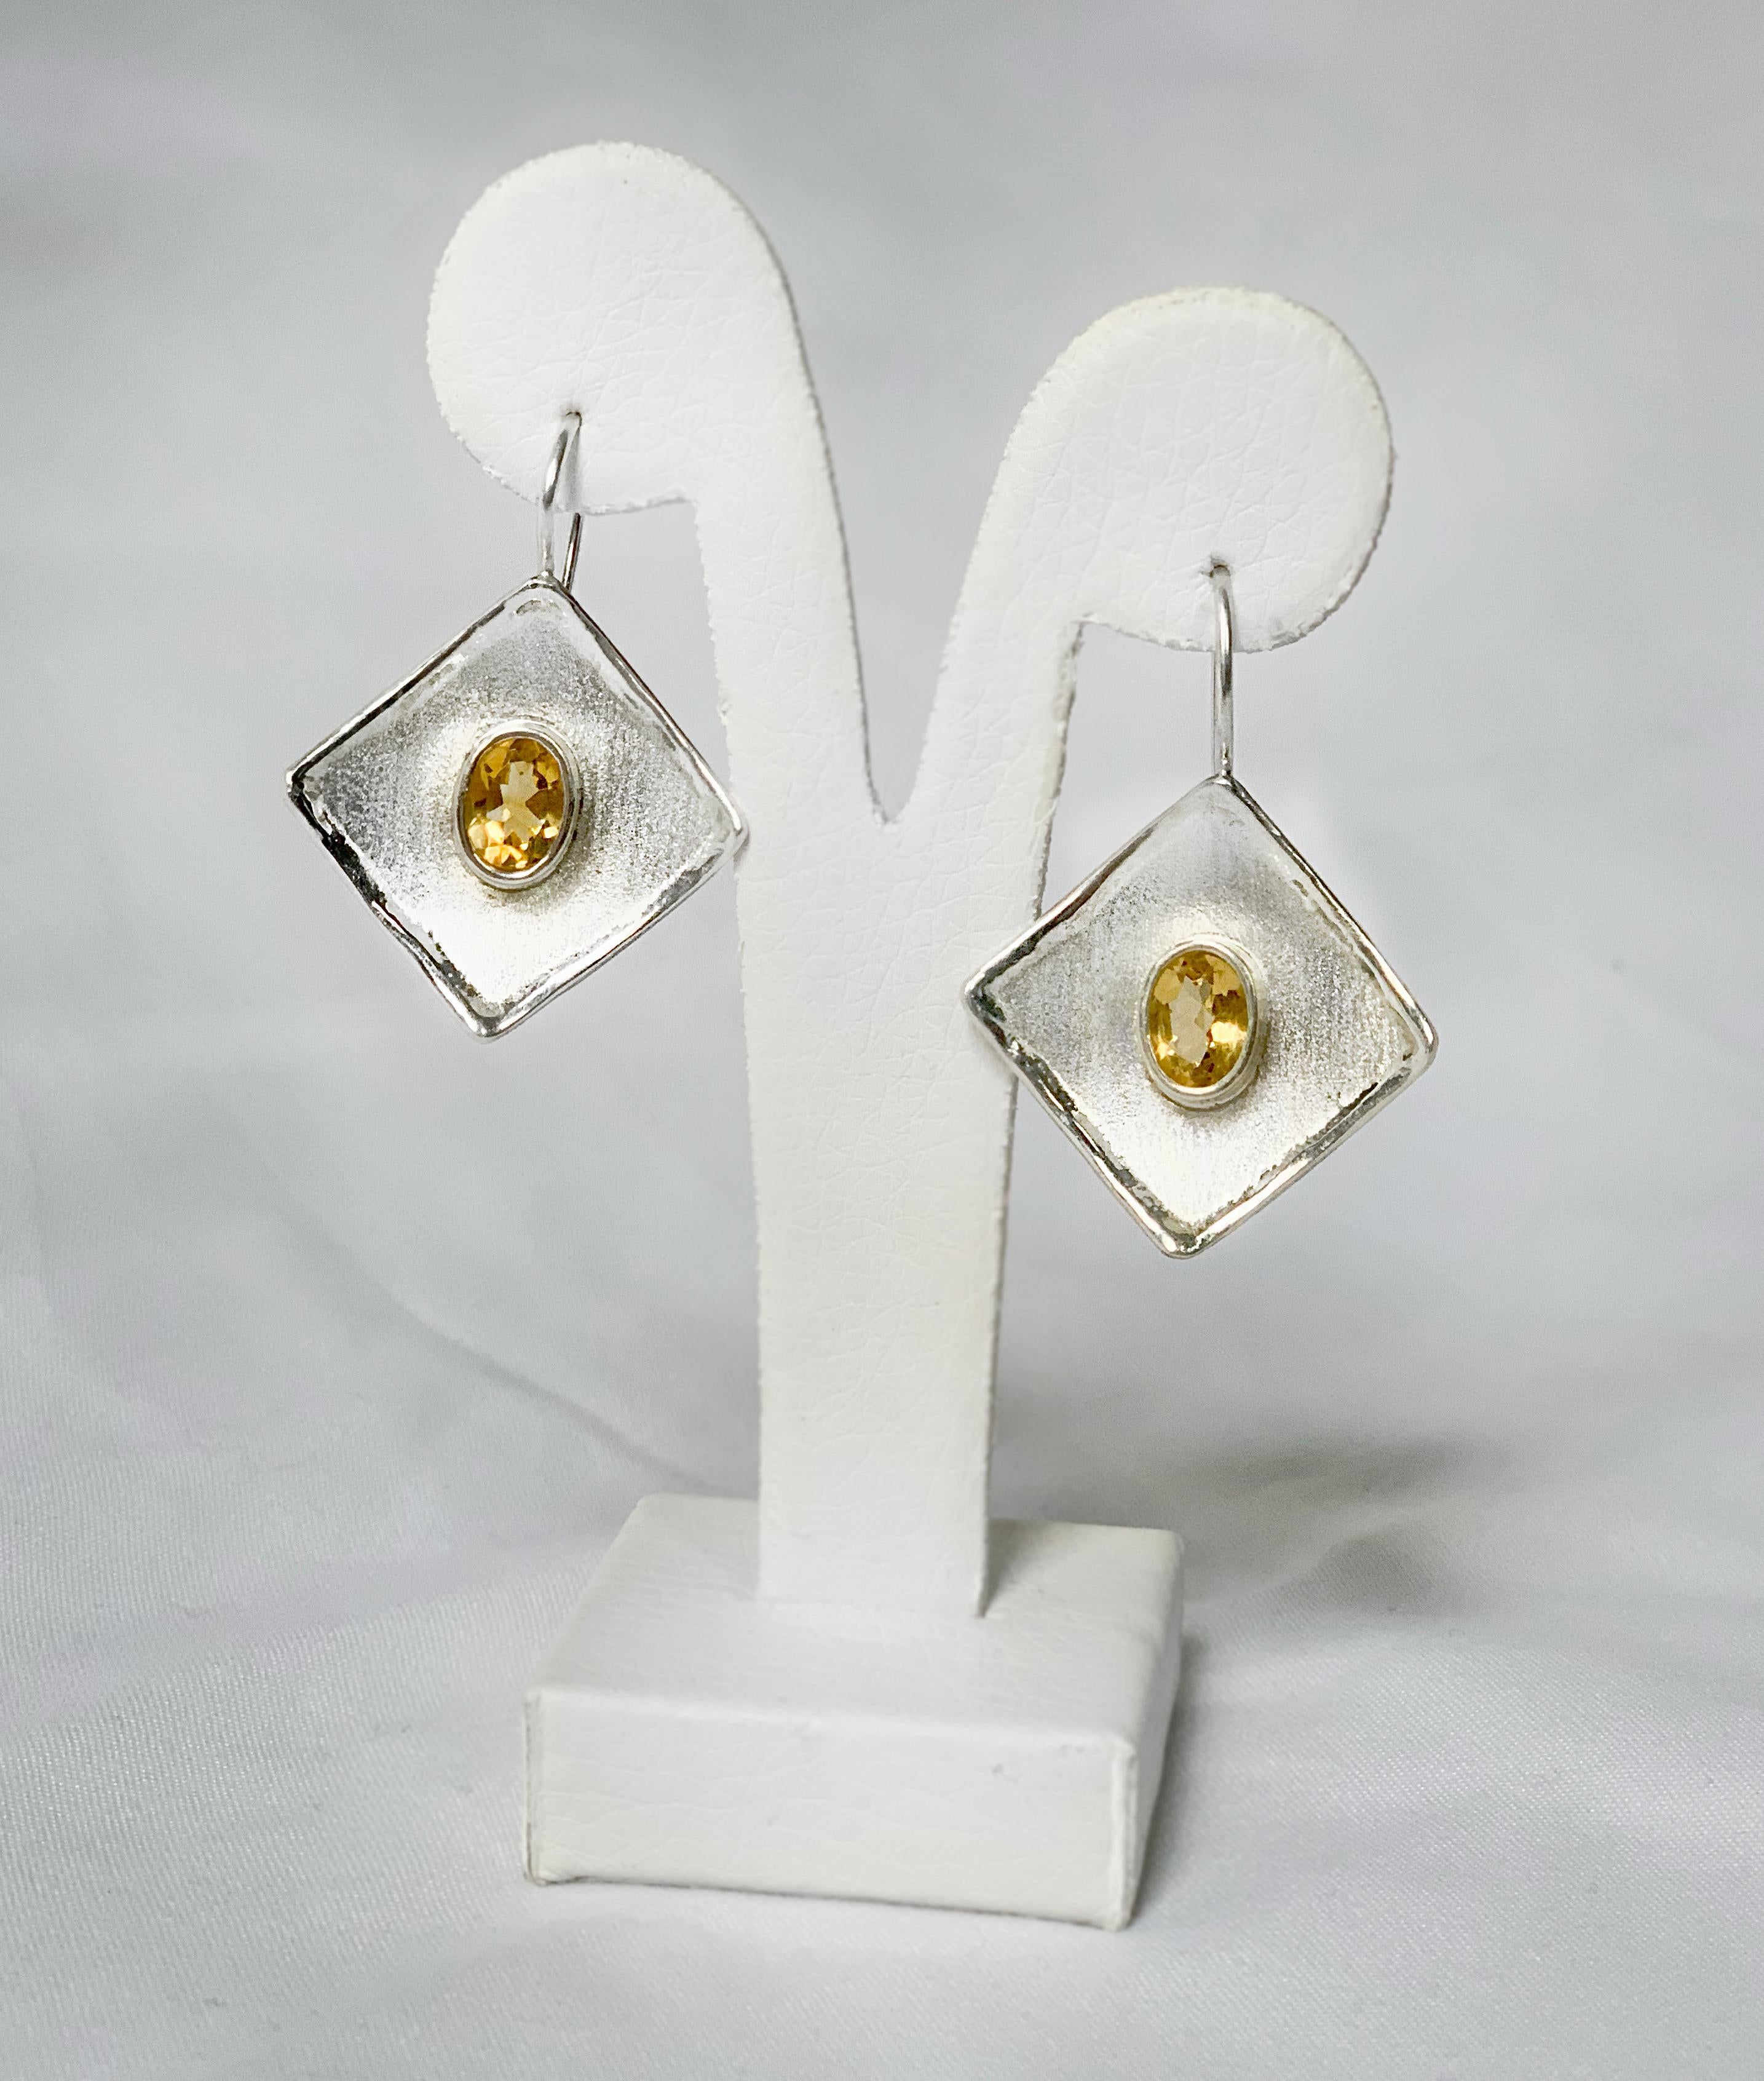 Yianni Creations Ammos Collection 100% Handmade Artisan Earrings from Fine Silver plated with palladium to protect the jewels from the Elements. Each earring feature a 1.25 Carat Oval Cut Citrine. Brushed texture and nature-inspired liquid edges